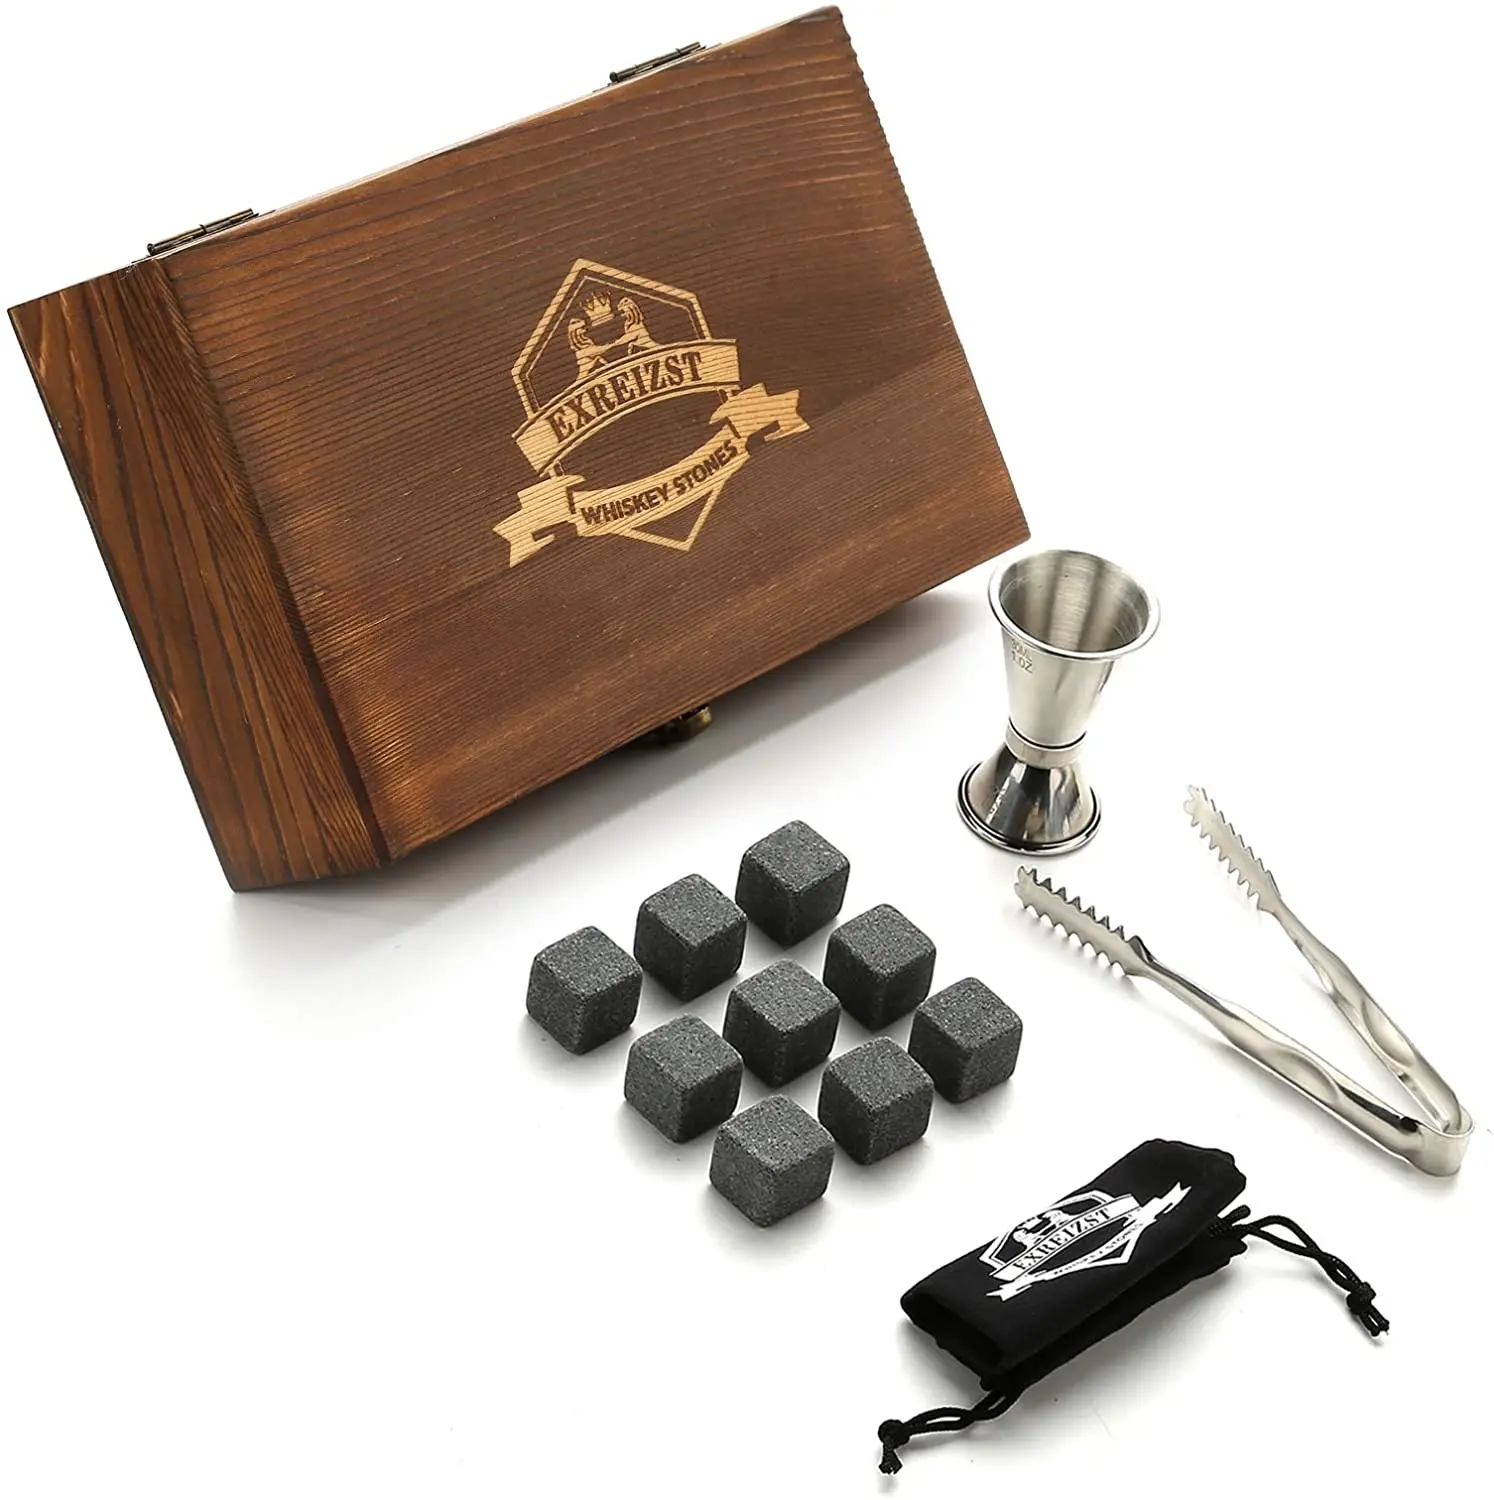 

Whiskey Stones Gift Set - 9 Granite Chilling Stones Whisky Rocks - Reusable Ice Cubes with Tongs Double-sided Jigger